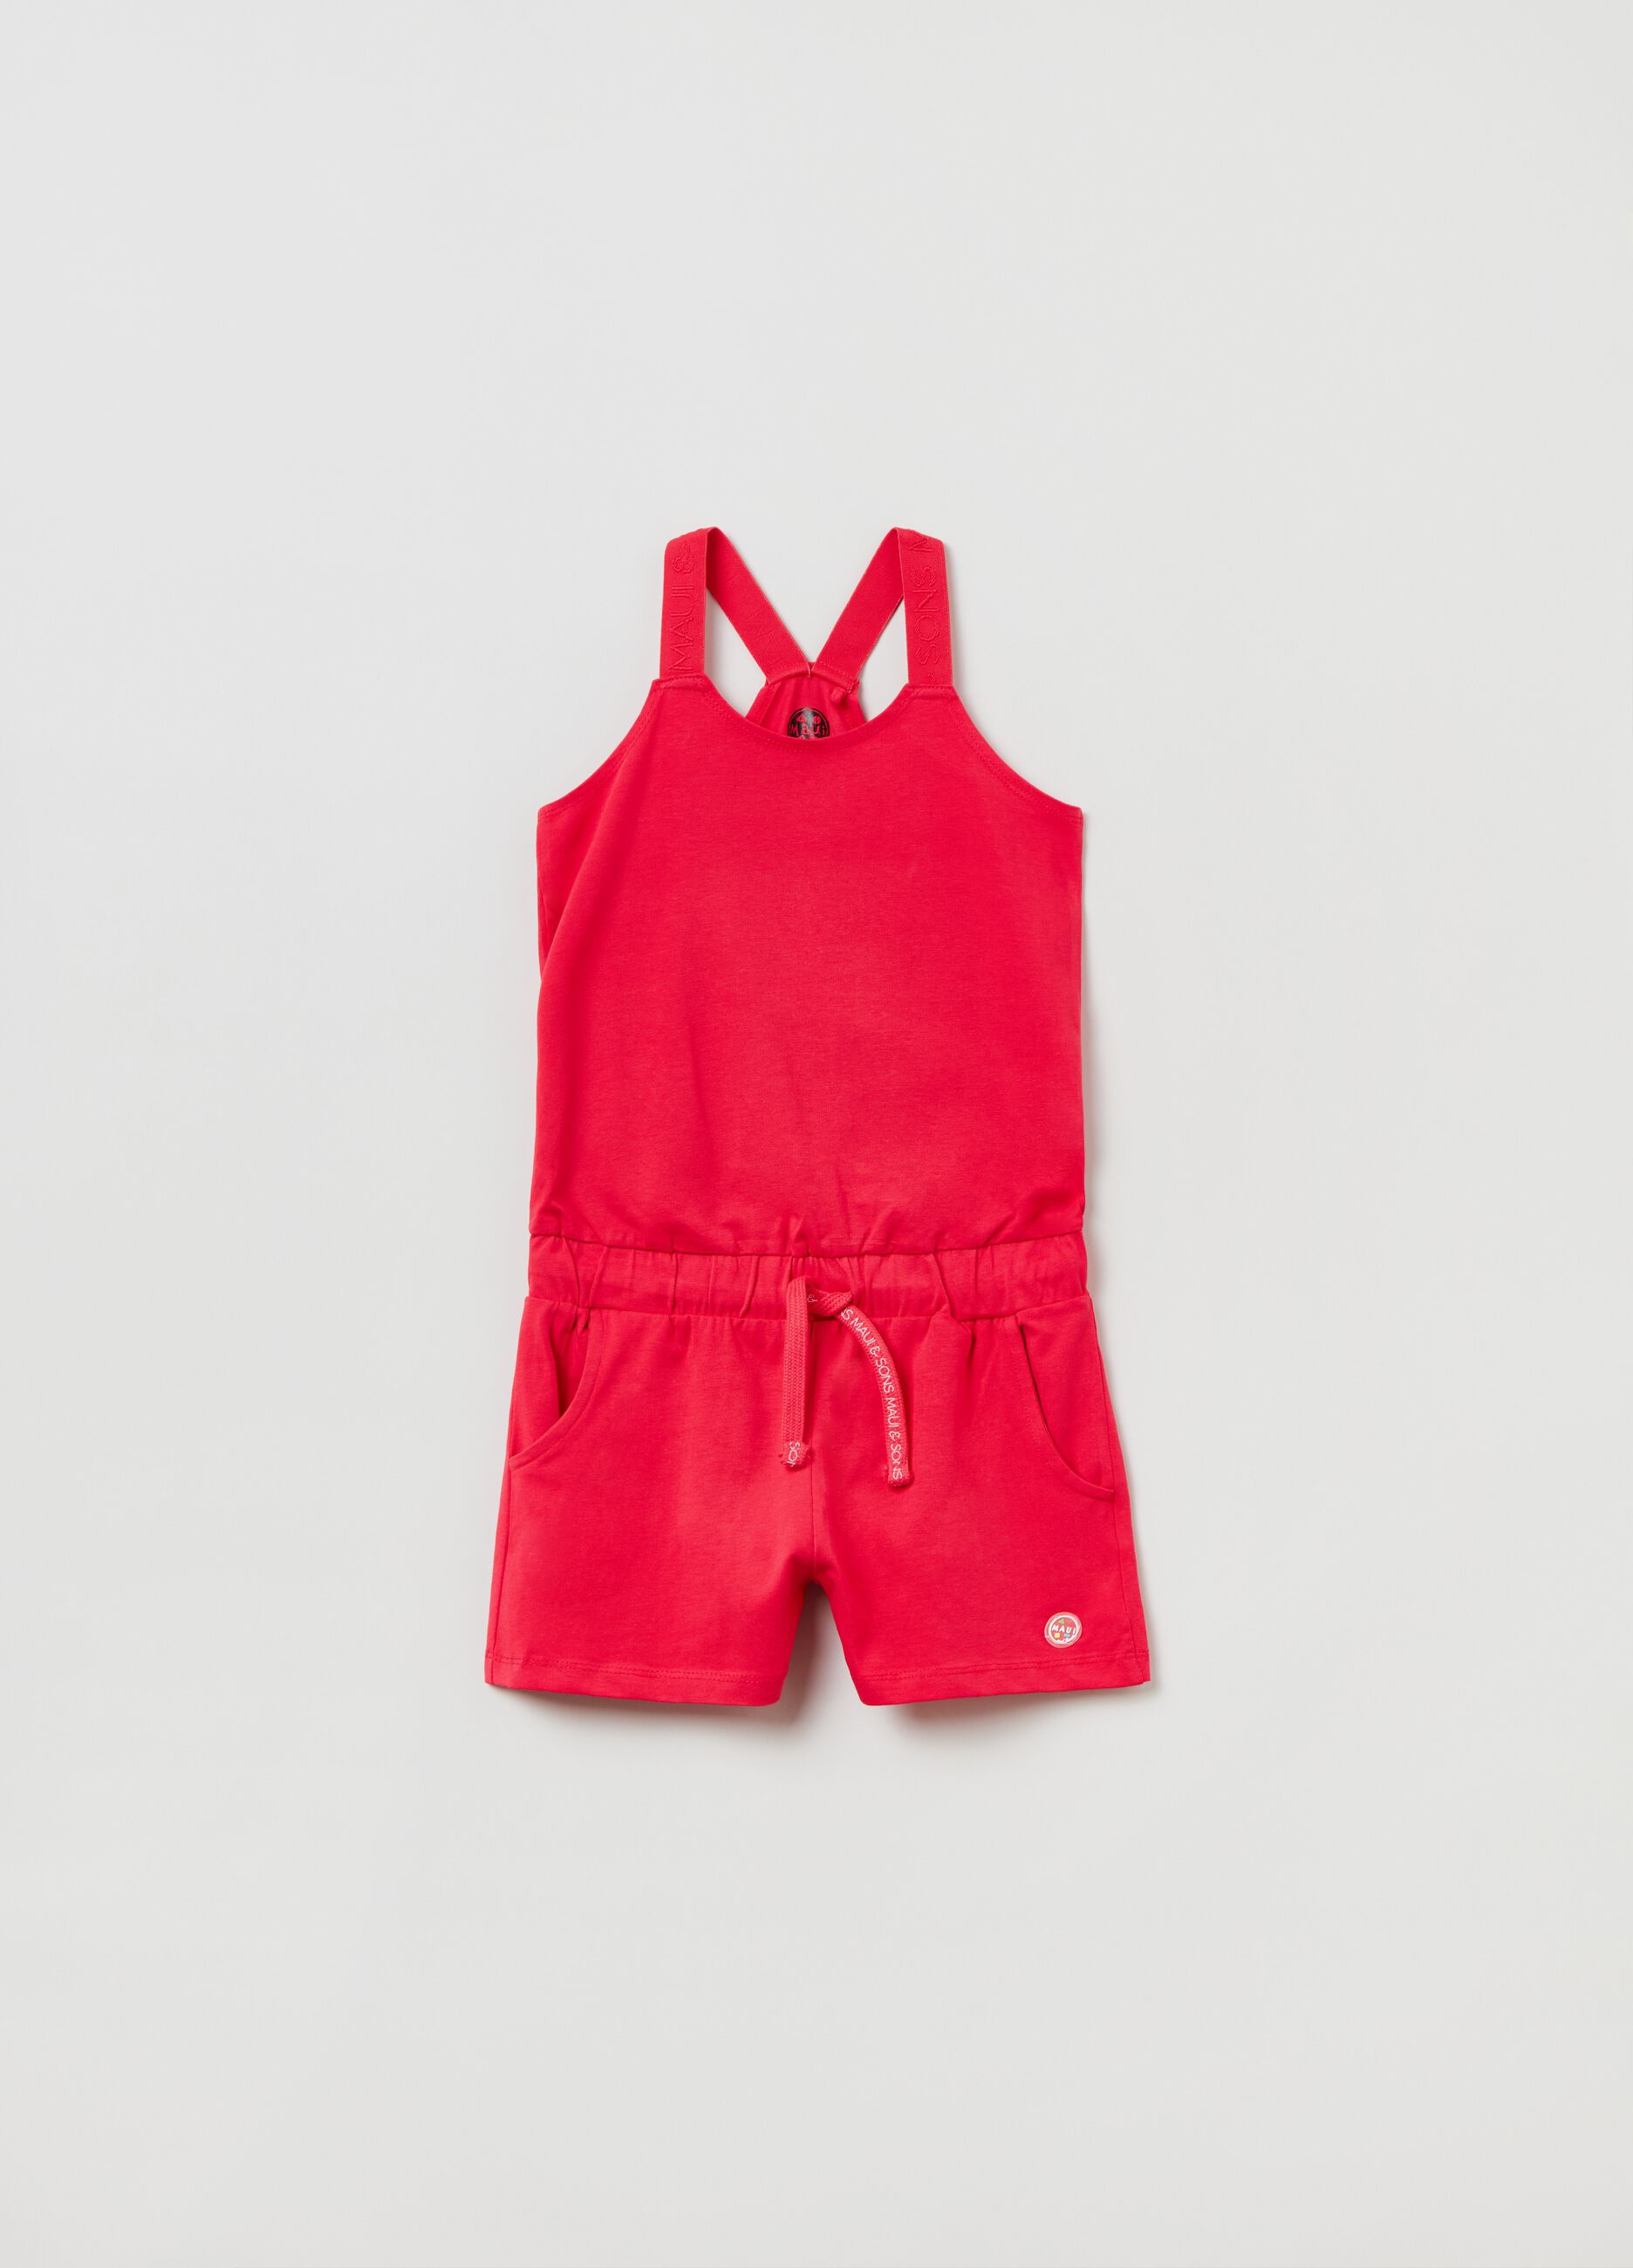 Maui and Sons short onesie